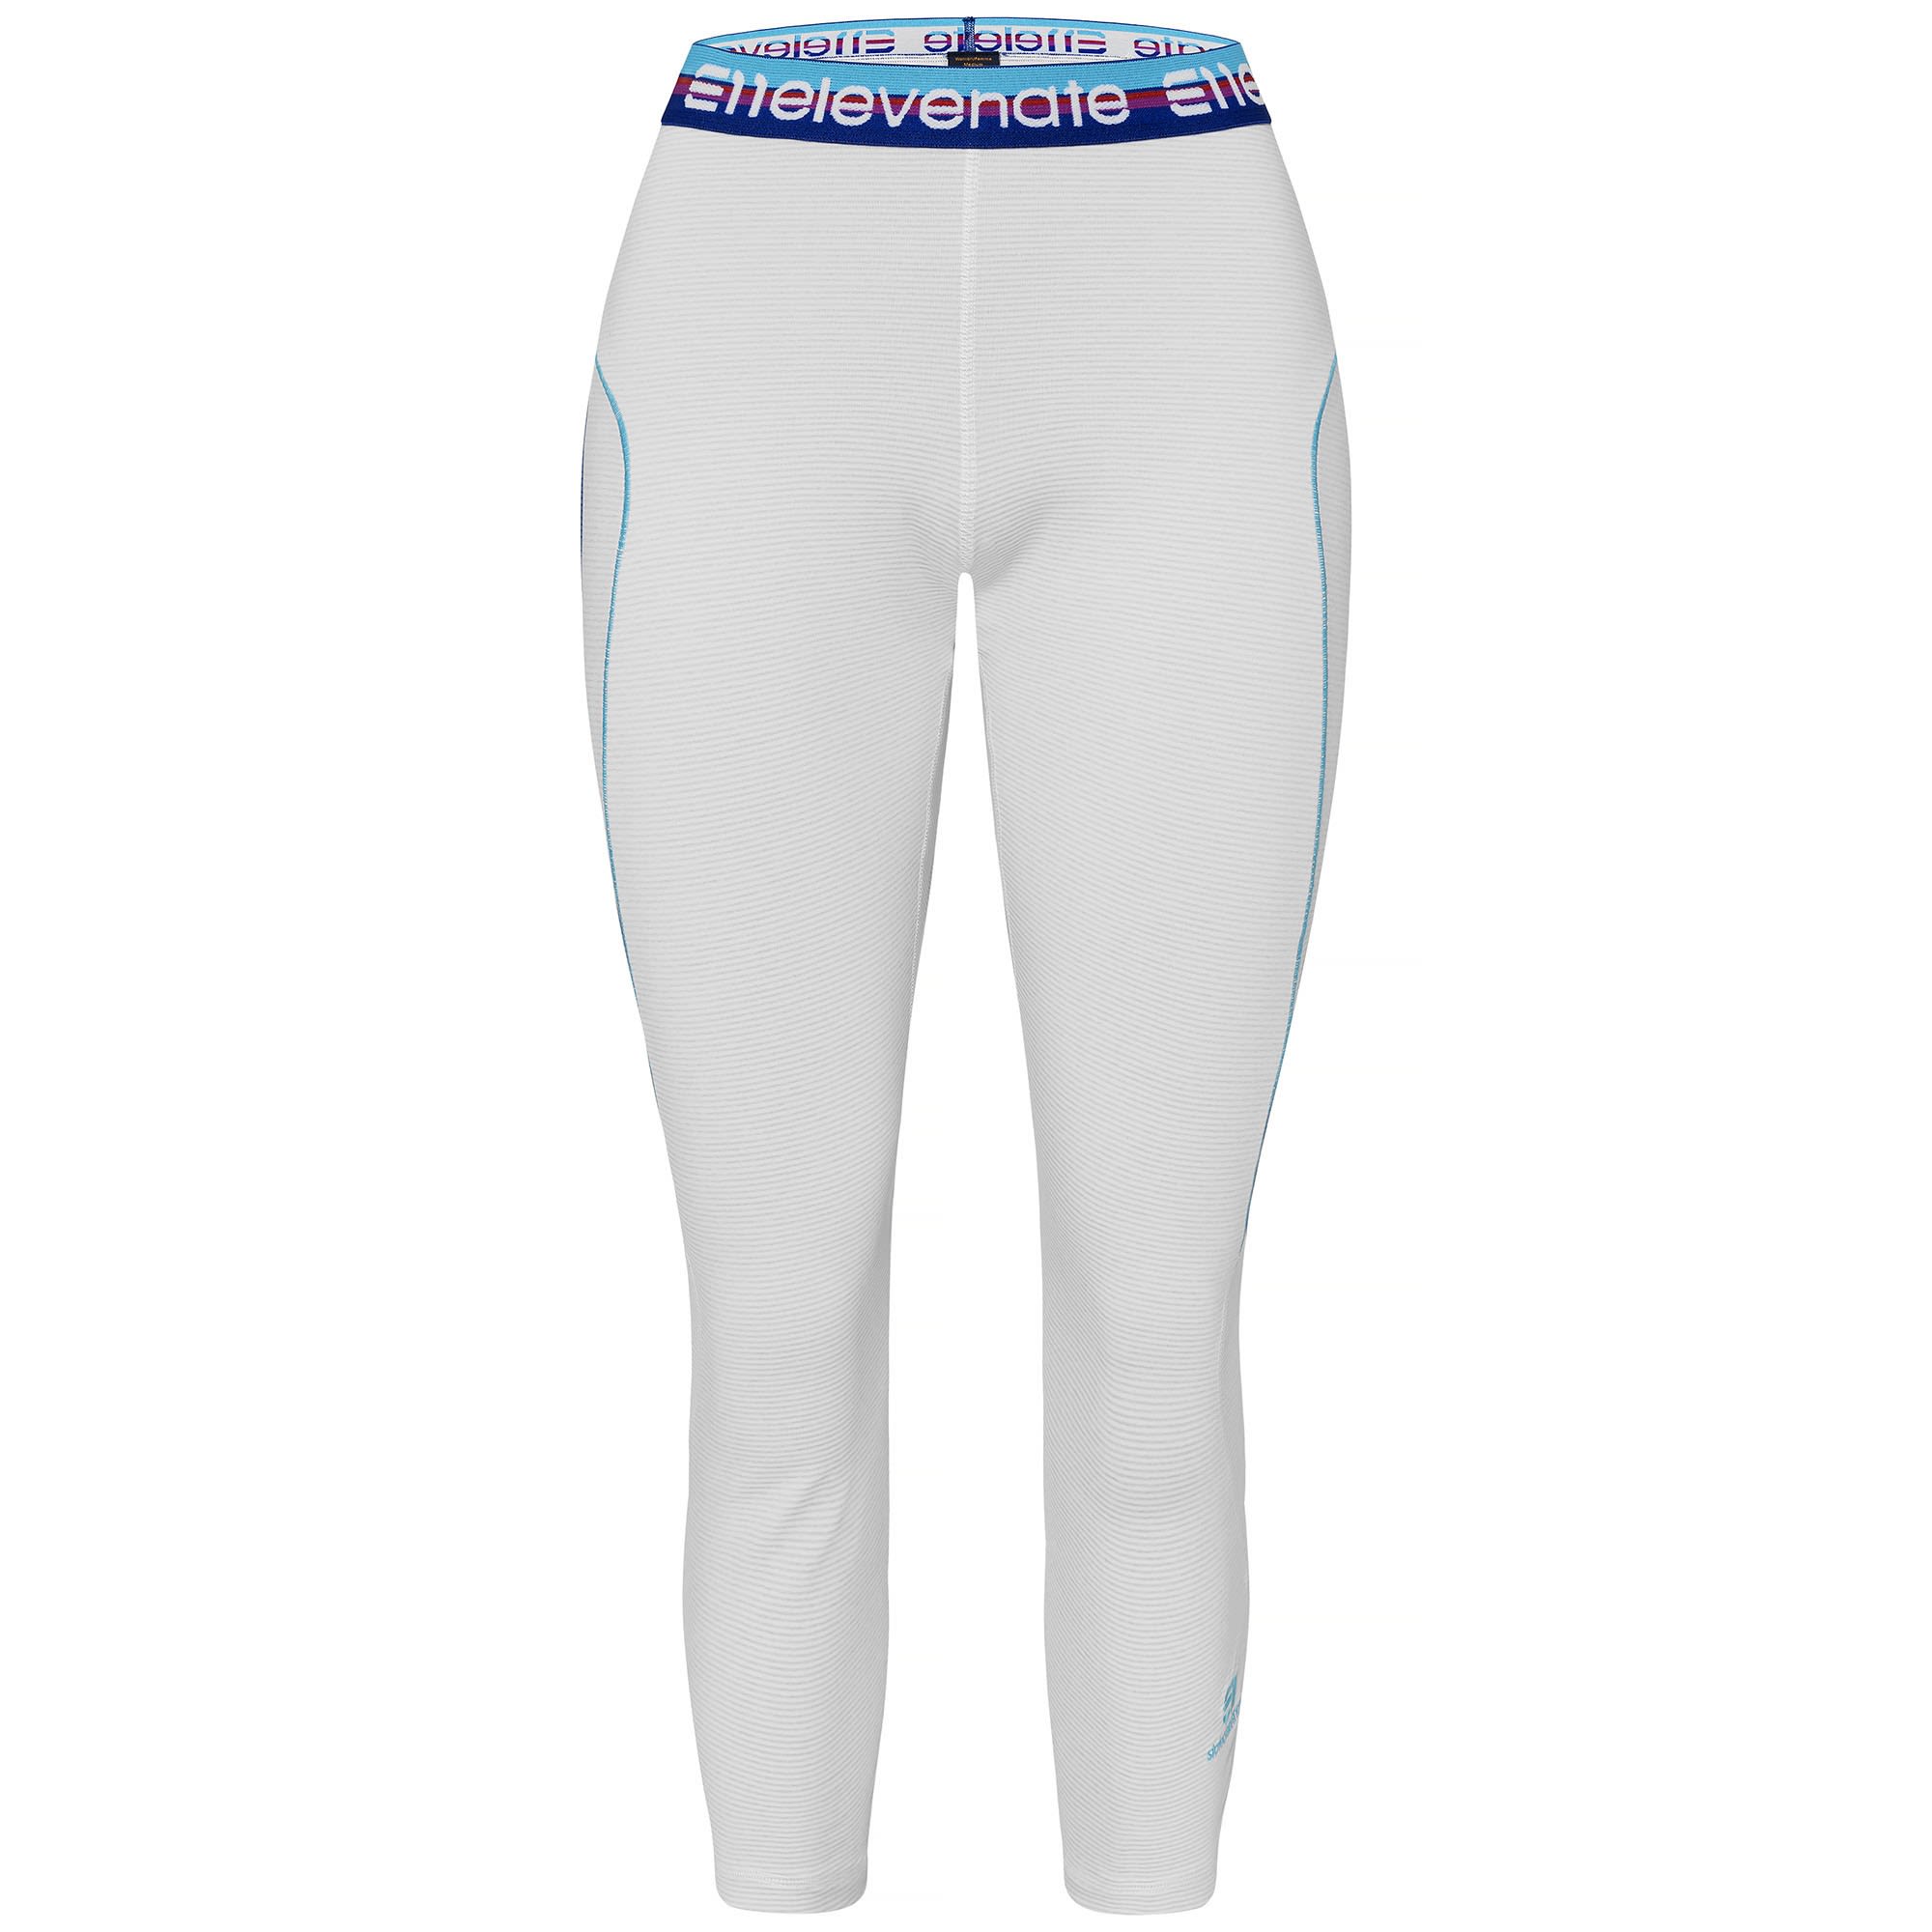 Elevenate Metailler Pants Weiss- Female 3-4-Hosen- Grsse L - Farbe White